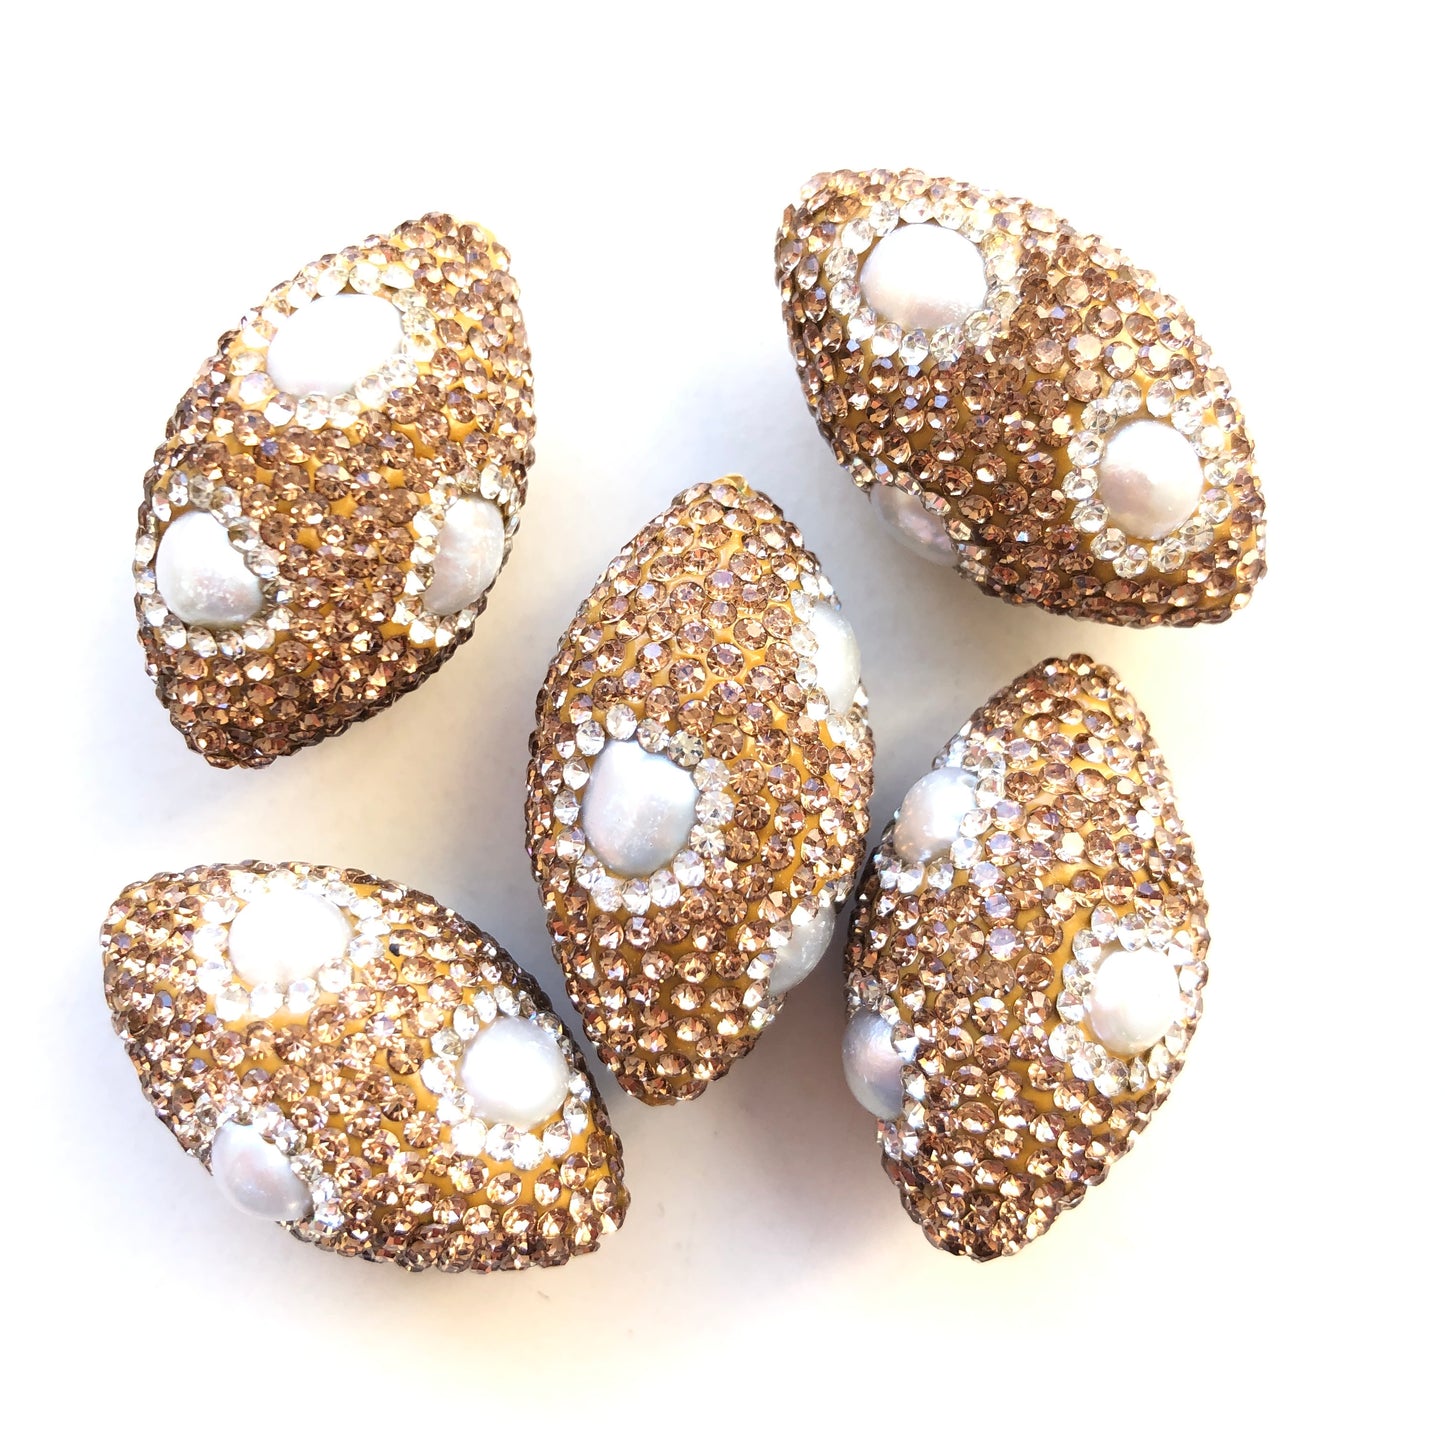 1PC Multicolor Rhinestone Pave Oval Spacers / Focal Beads Style 4 Rhinestone Spacers Focal Beads Charms Beads Beyond